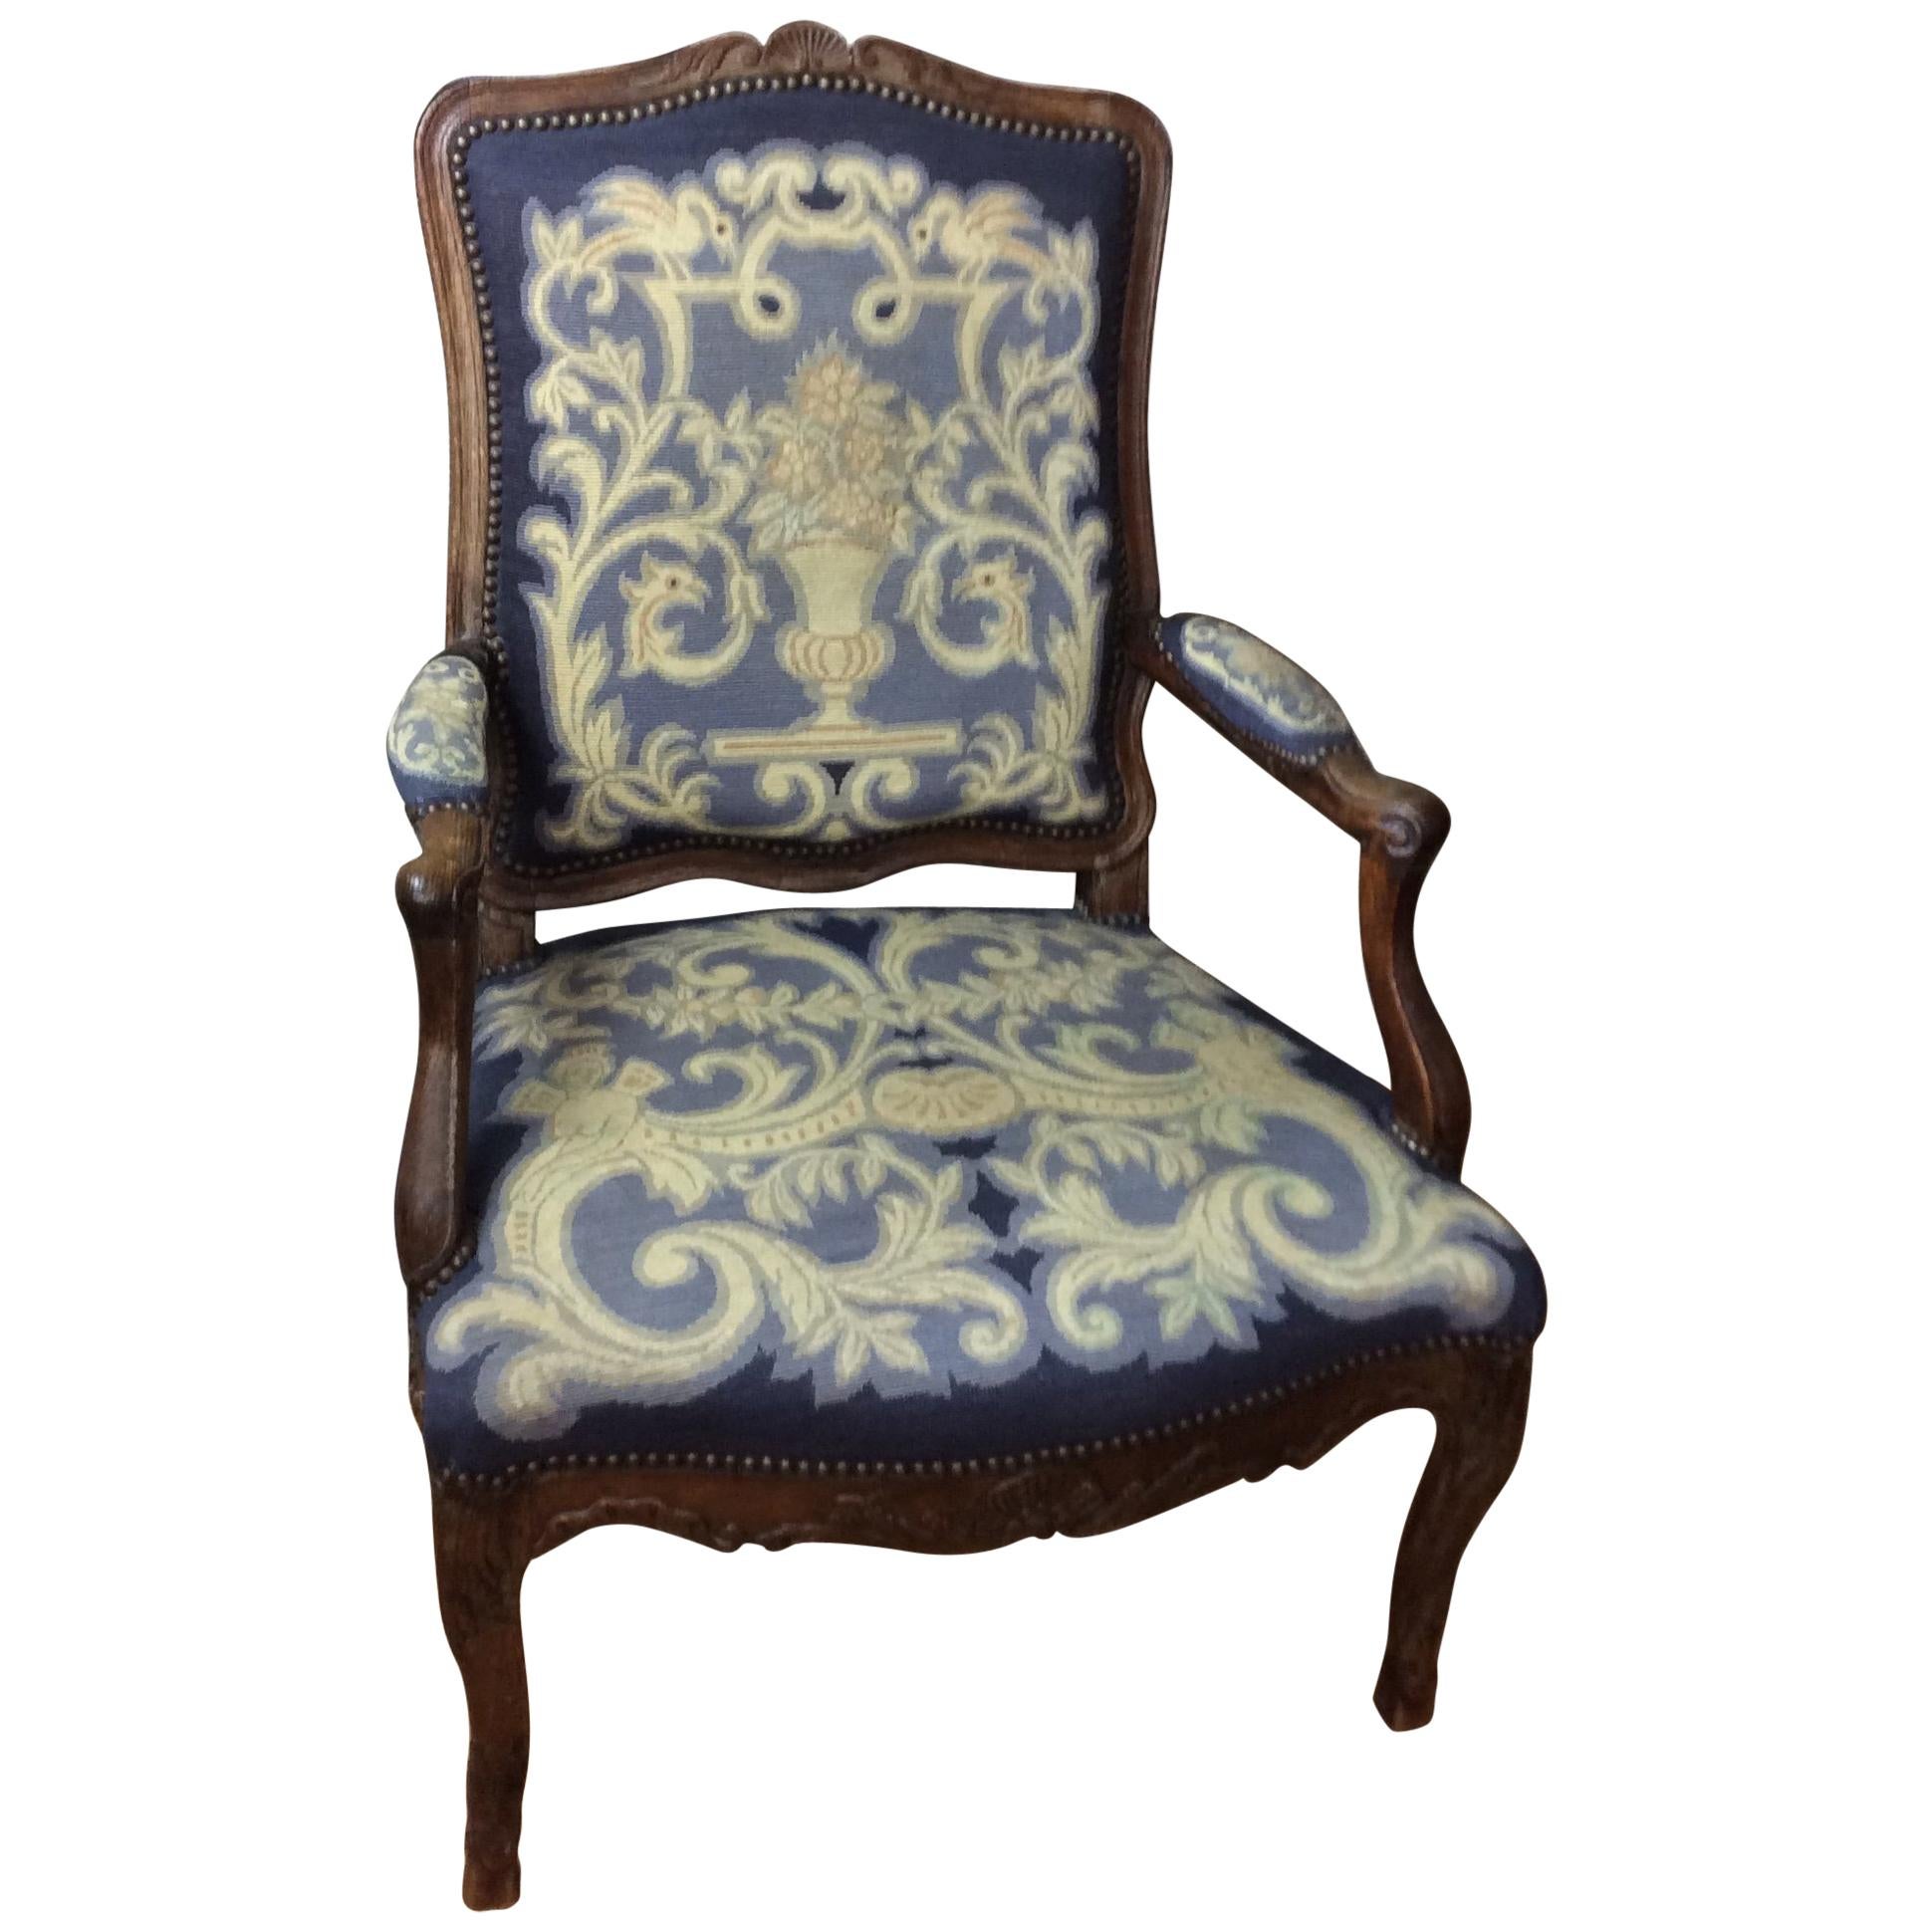 Early 18th Century French Régence Carved Armchair For Sale